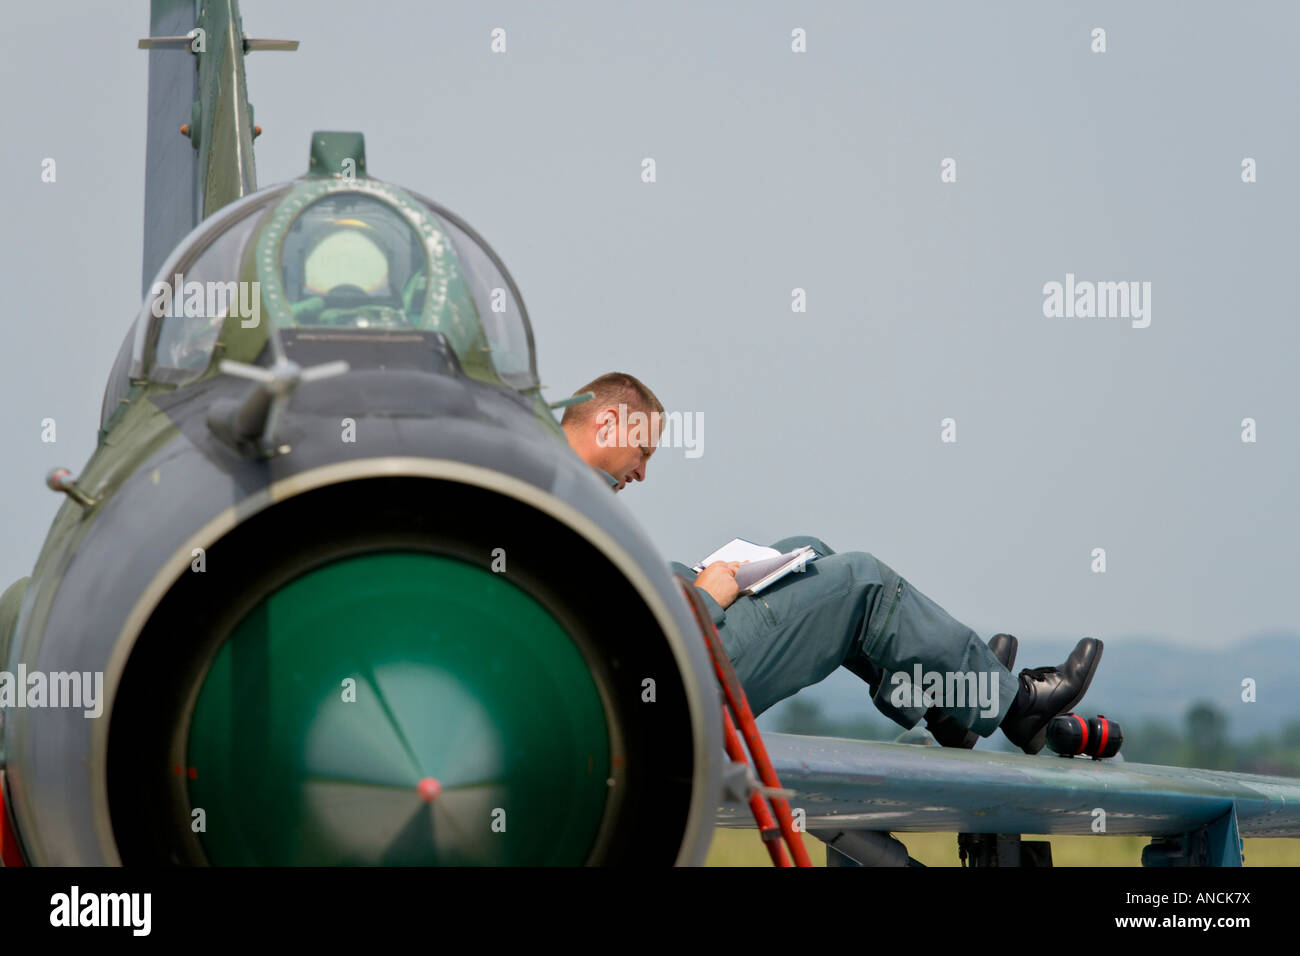 Croatian Air Force MiG-21 BISD fighter, Pleso AFB during 'open day' visit in 2007, pilot is writing notes while sitting on wing Stock Photo